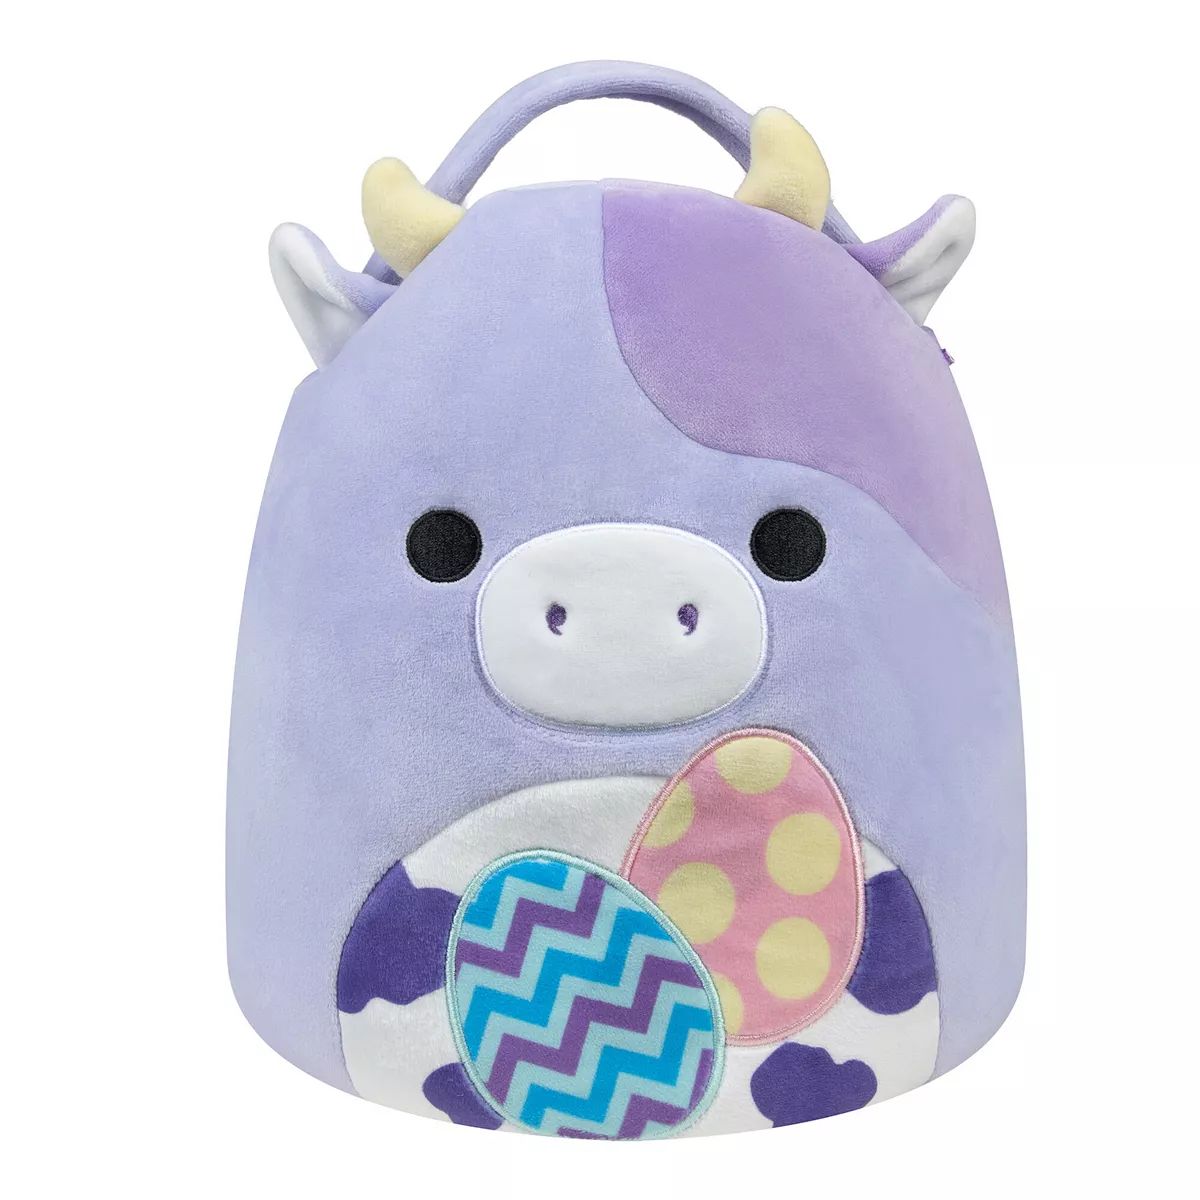 Squishmallows 12-in. Bubba the Purple Cow with Easter Eggs | Kohl's